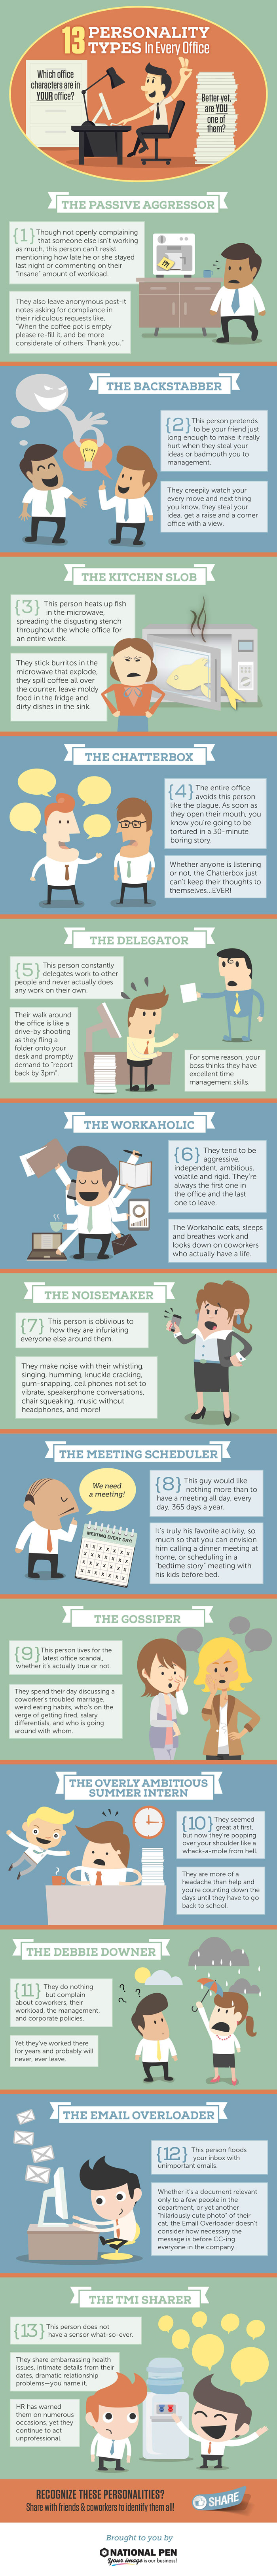 13-personality-types-whos-in-your-office_5249b6f421f81